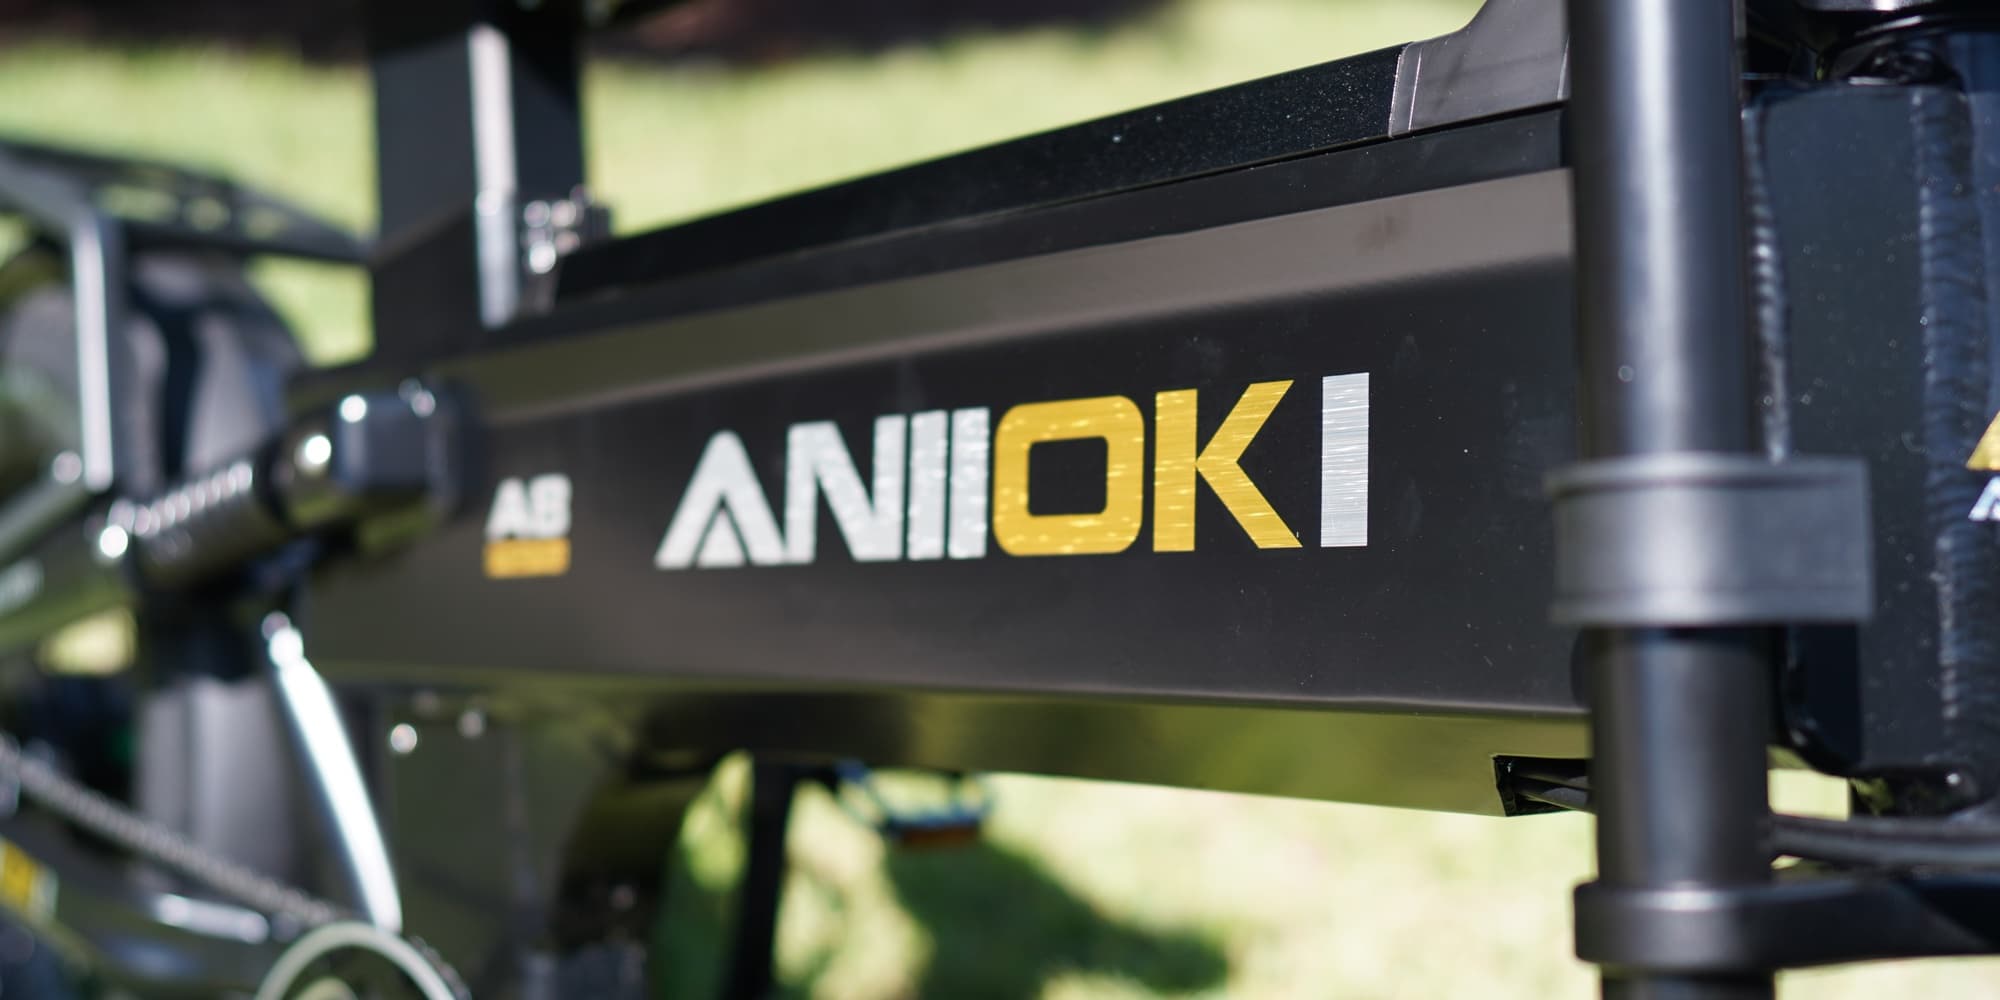 Review: The Aniioki full-suspension e-bike has the biggest battery